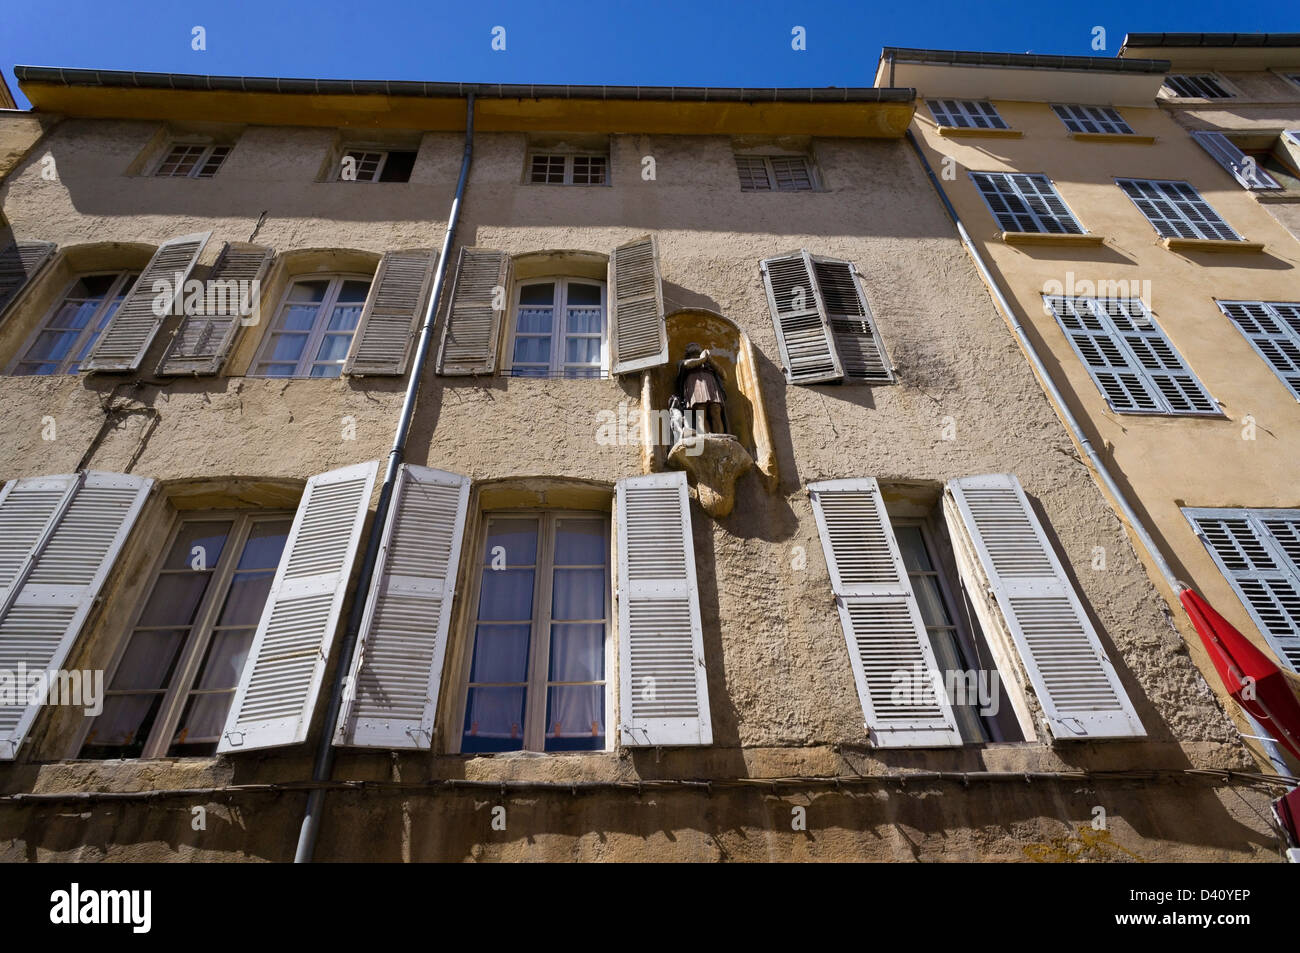 Houses in Aix-en-Provence, France Stock Photo